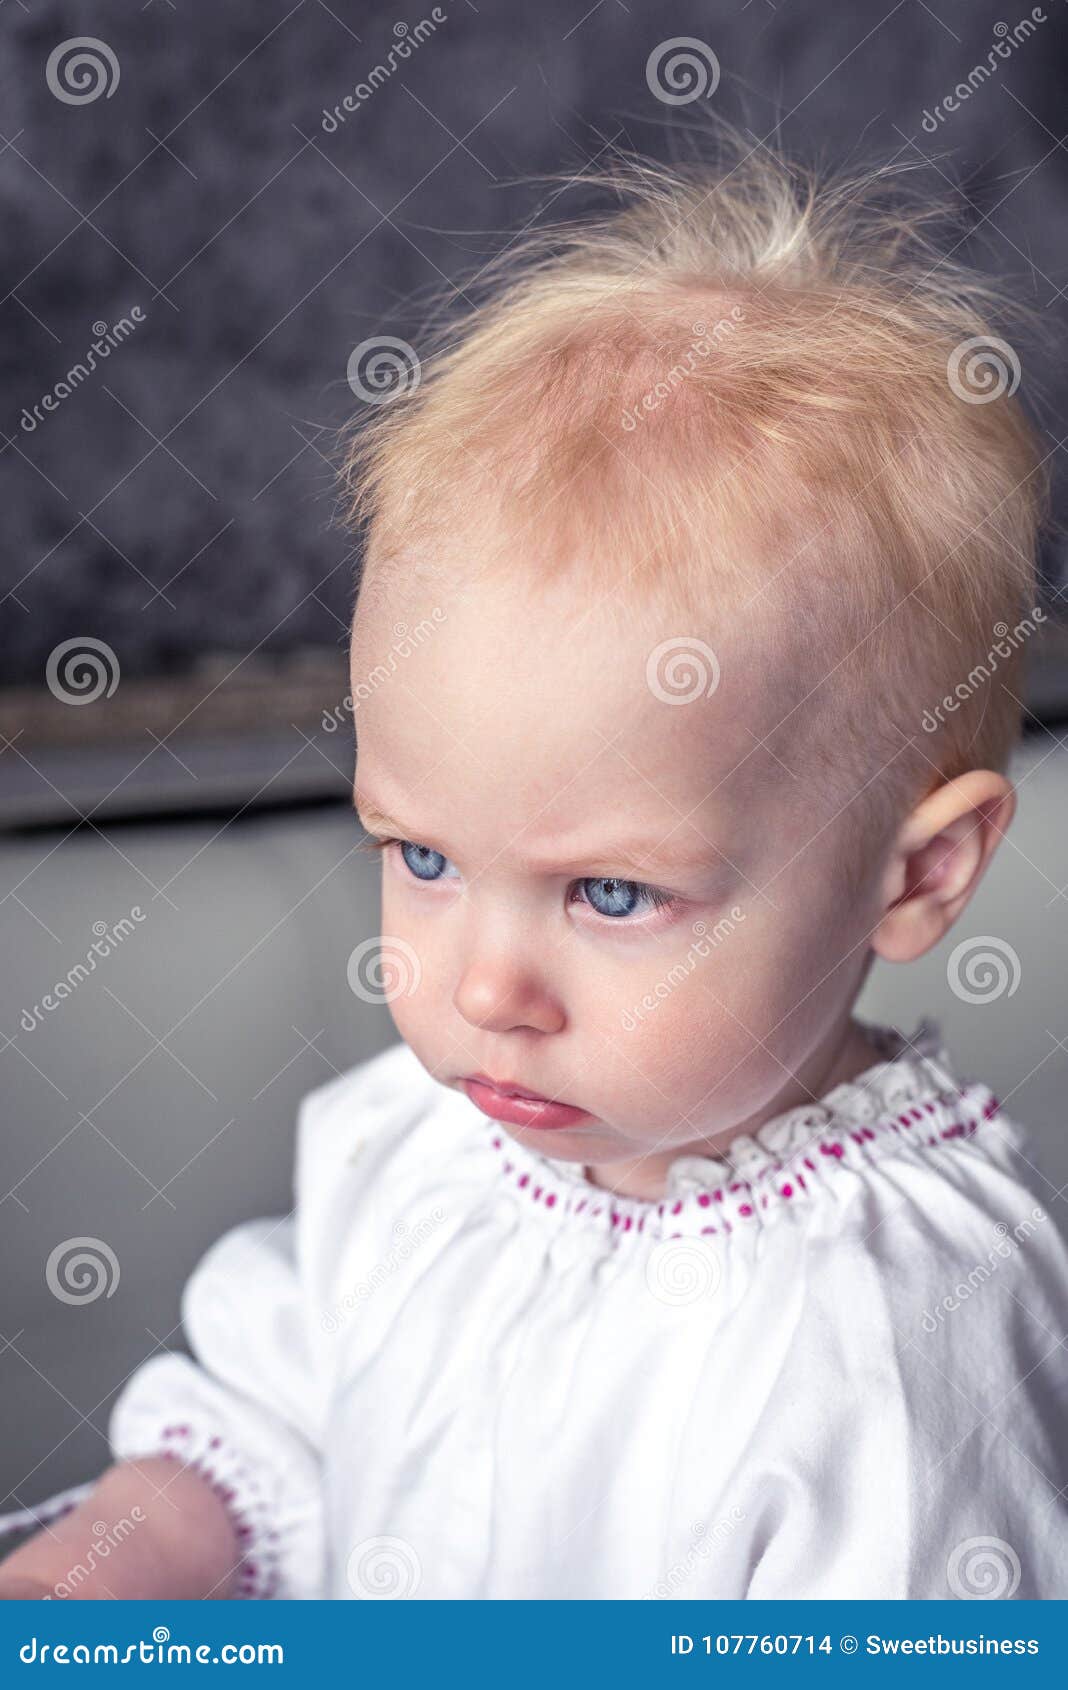 Little Cute Kid With A Blond Hair Stock Photo Image Of